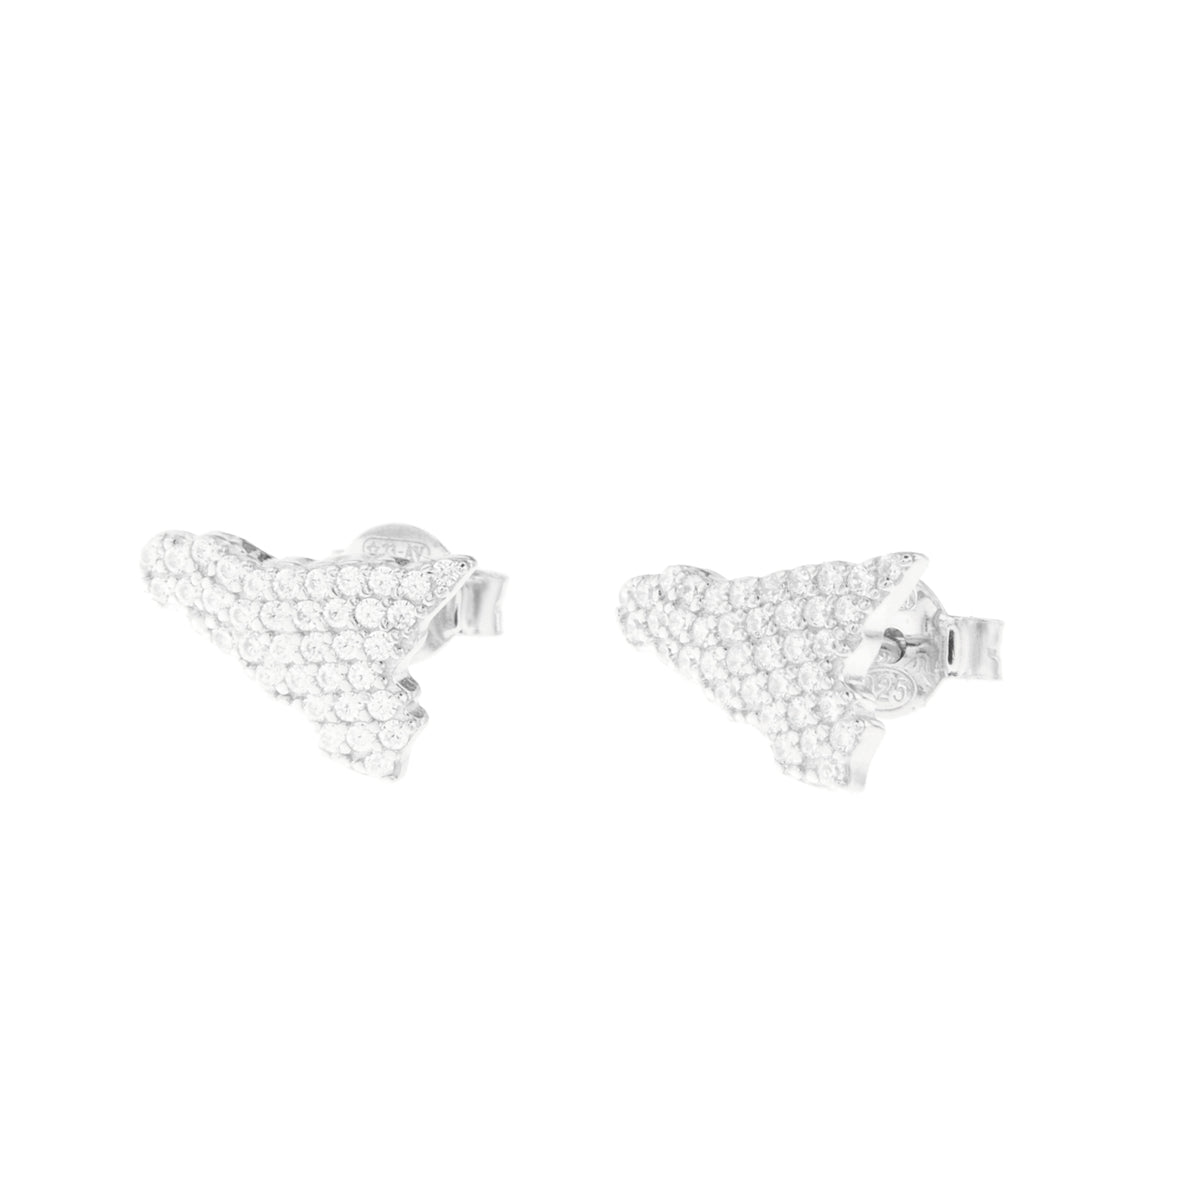 925 silver earrings in the shape of Sicily embellished with white zirconi